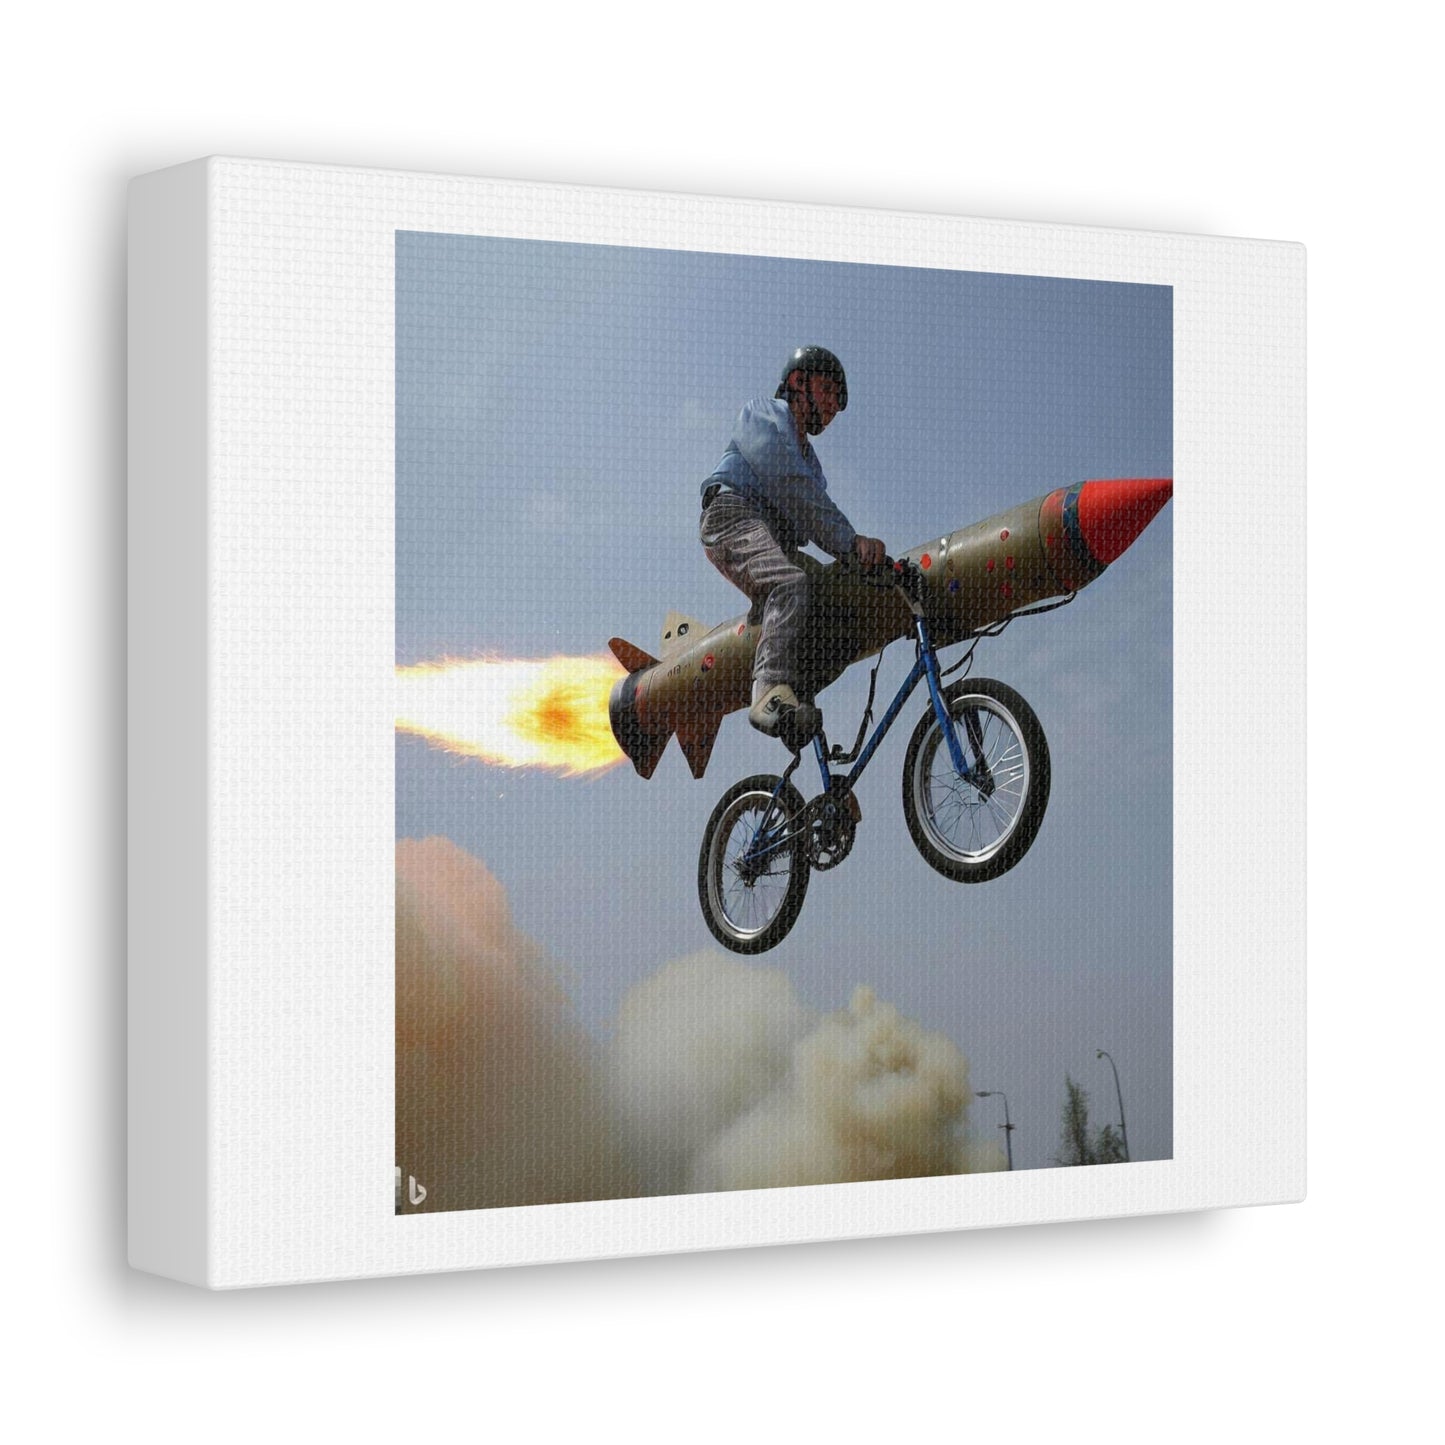 Rocket Man at the San Diego County Fair 'Designed by AI' Art Print on Canvas